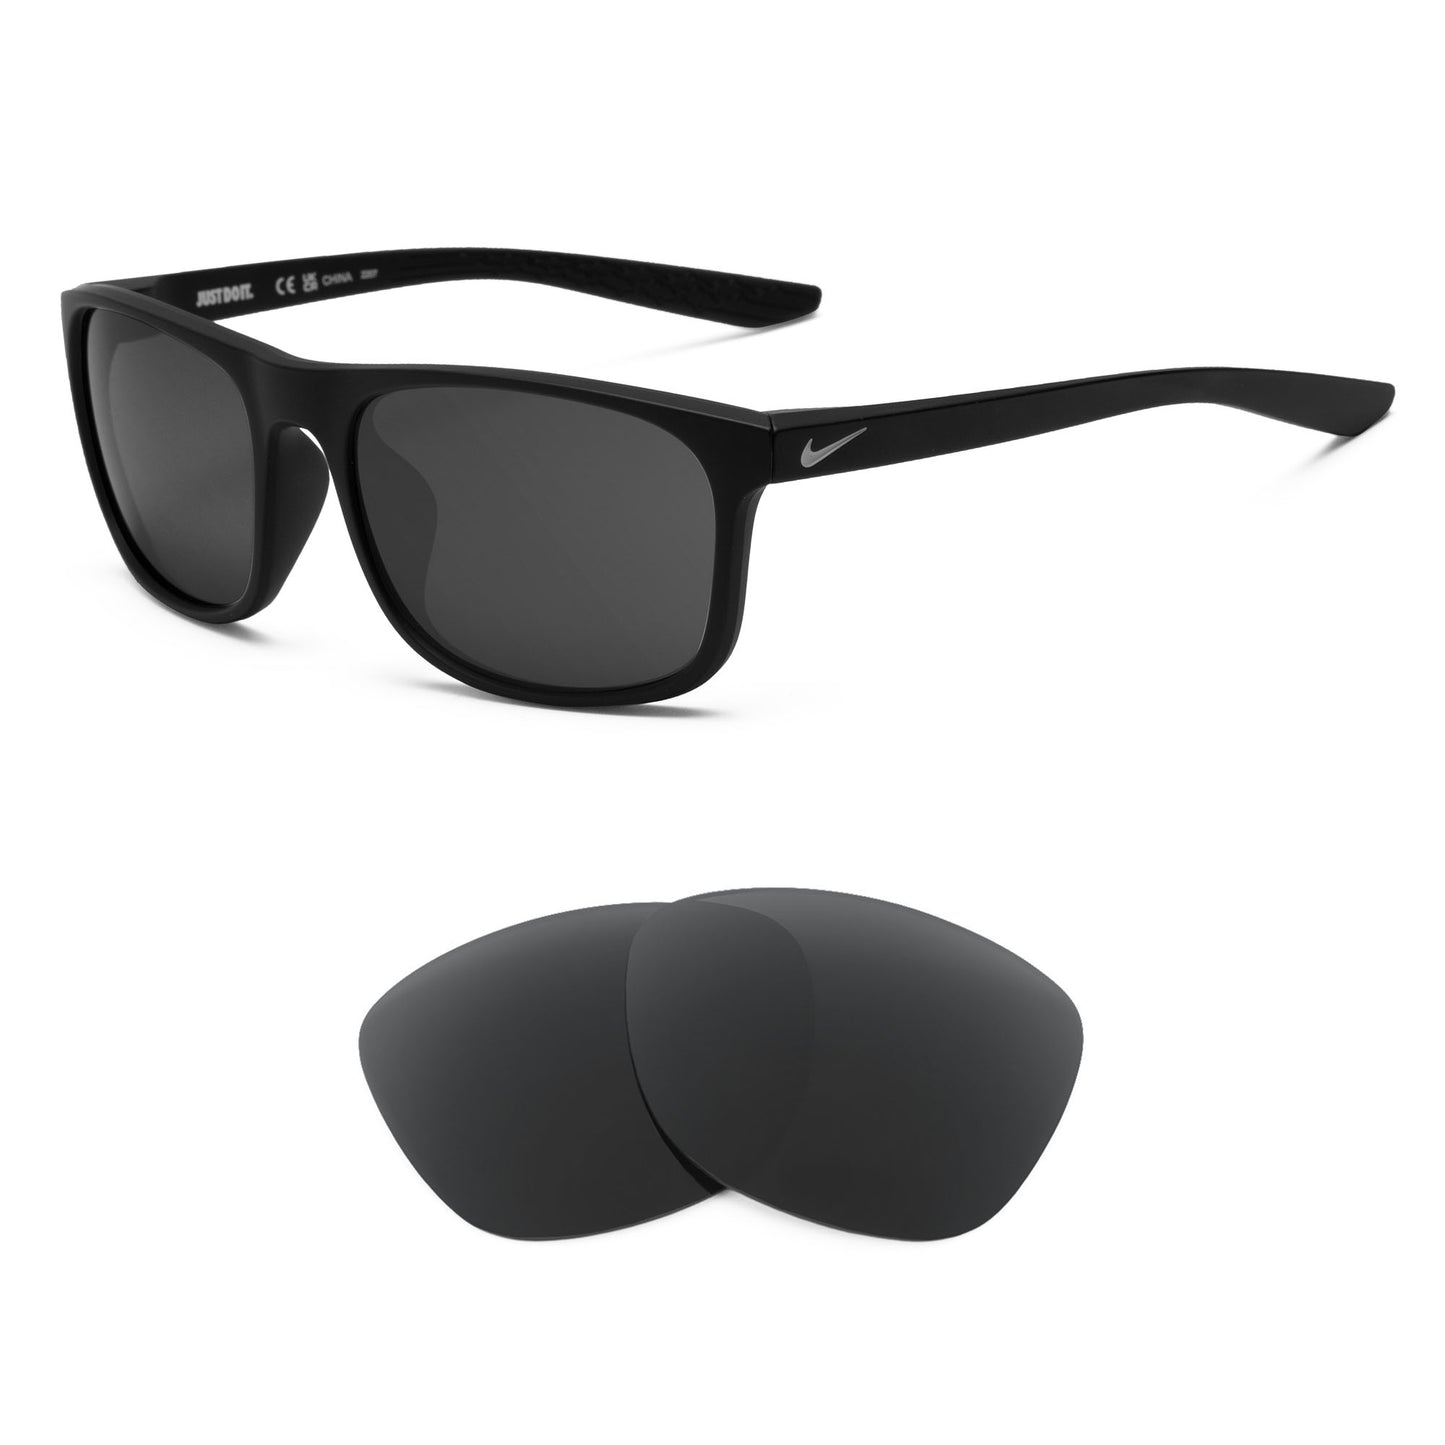 Nike Endure sunglasses with replacement lenses